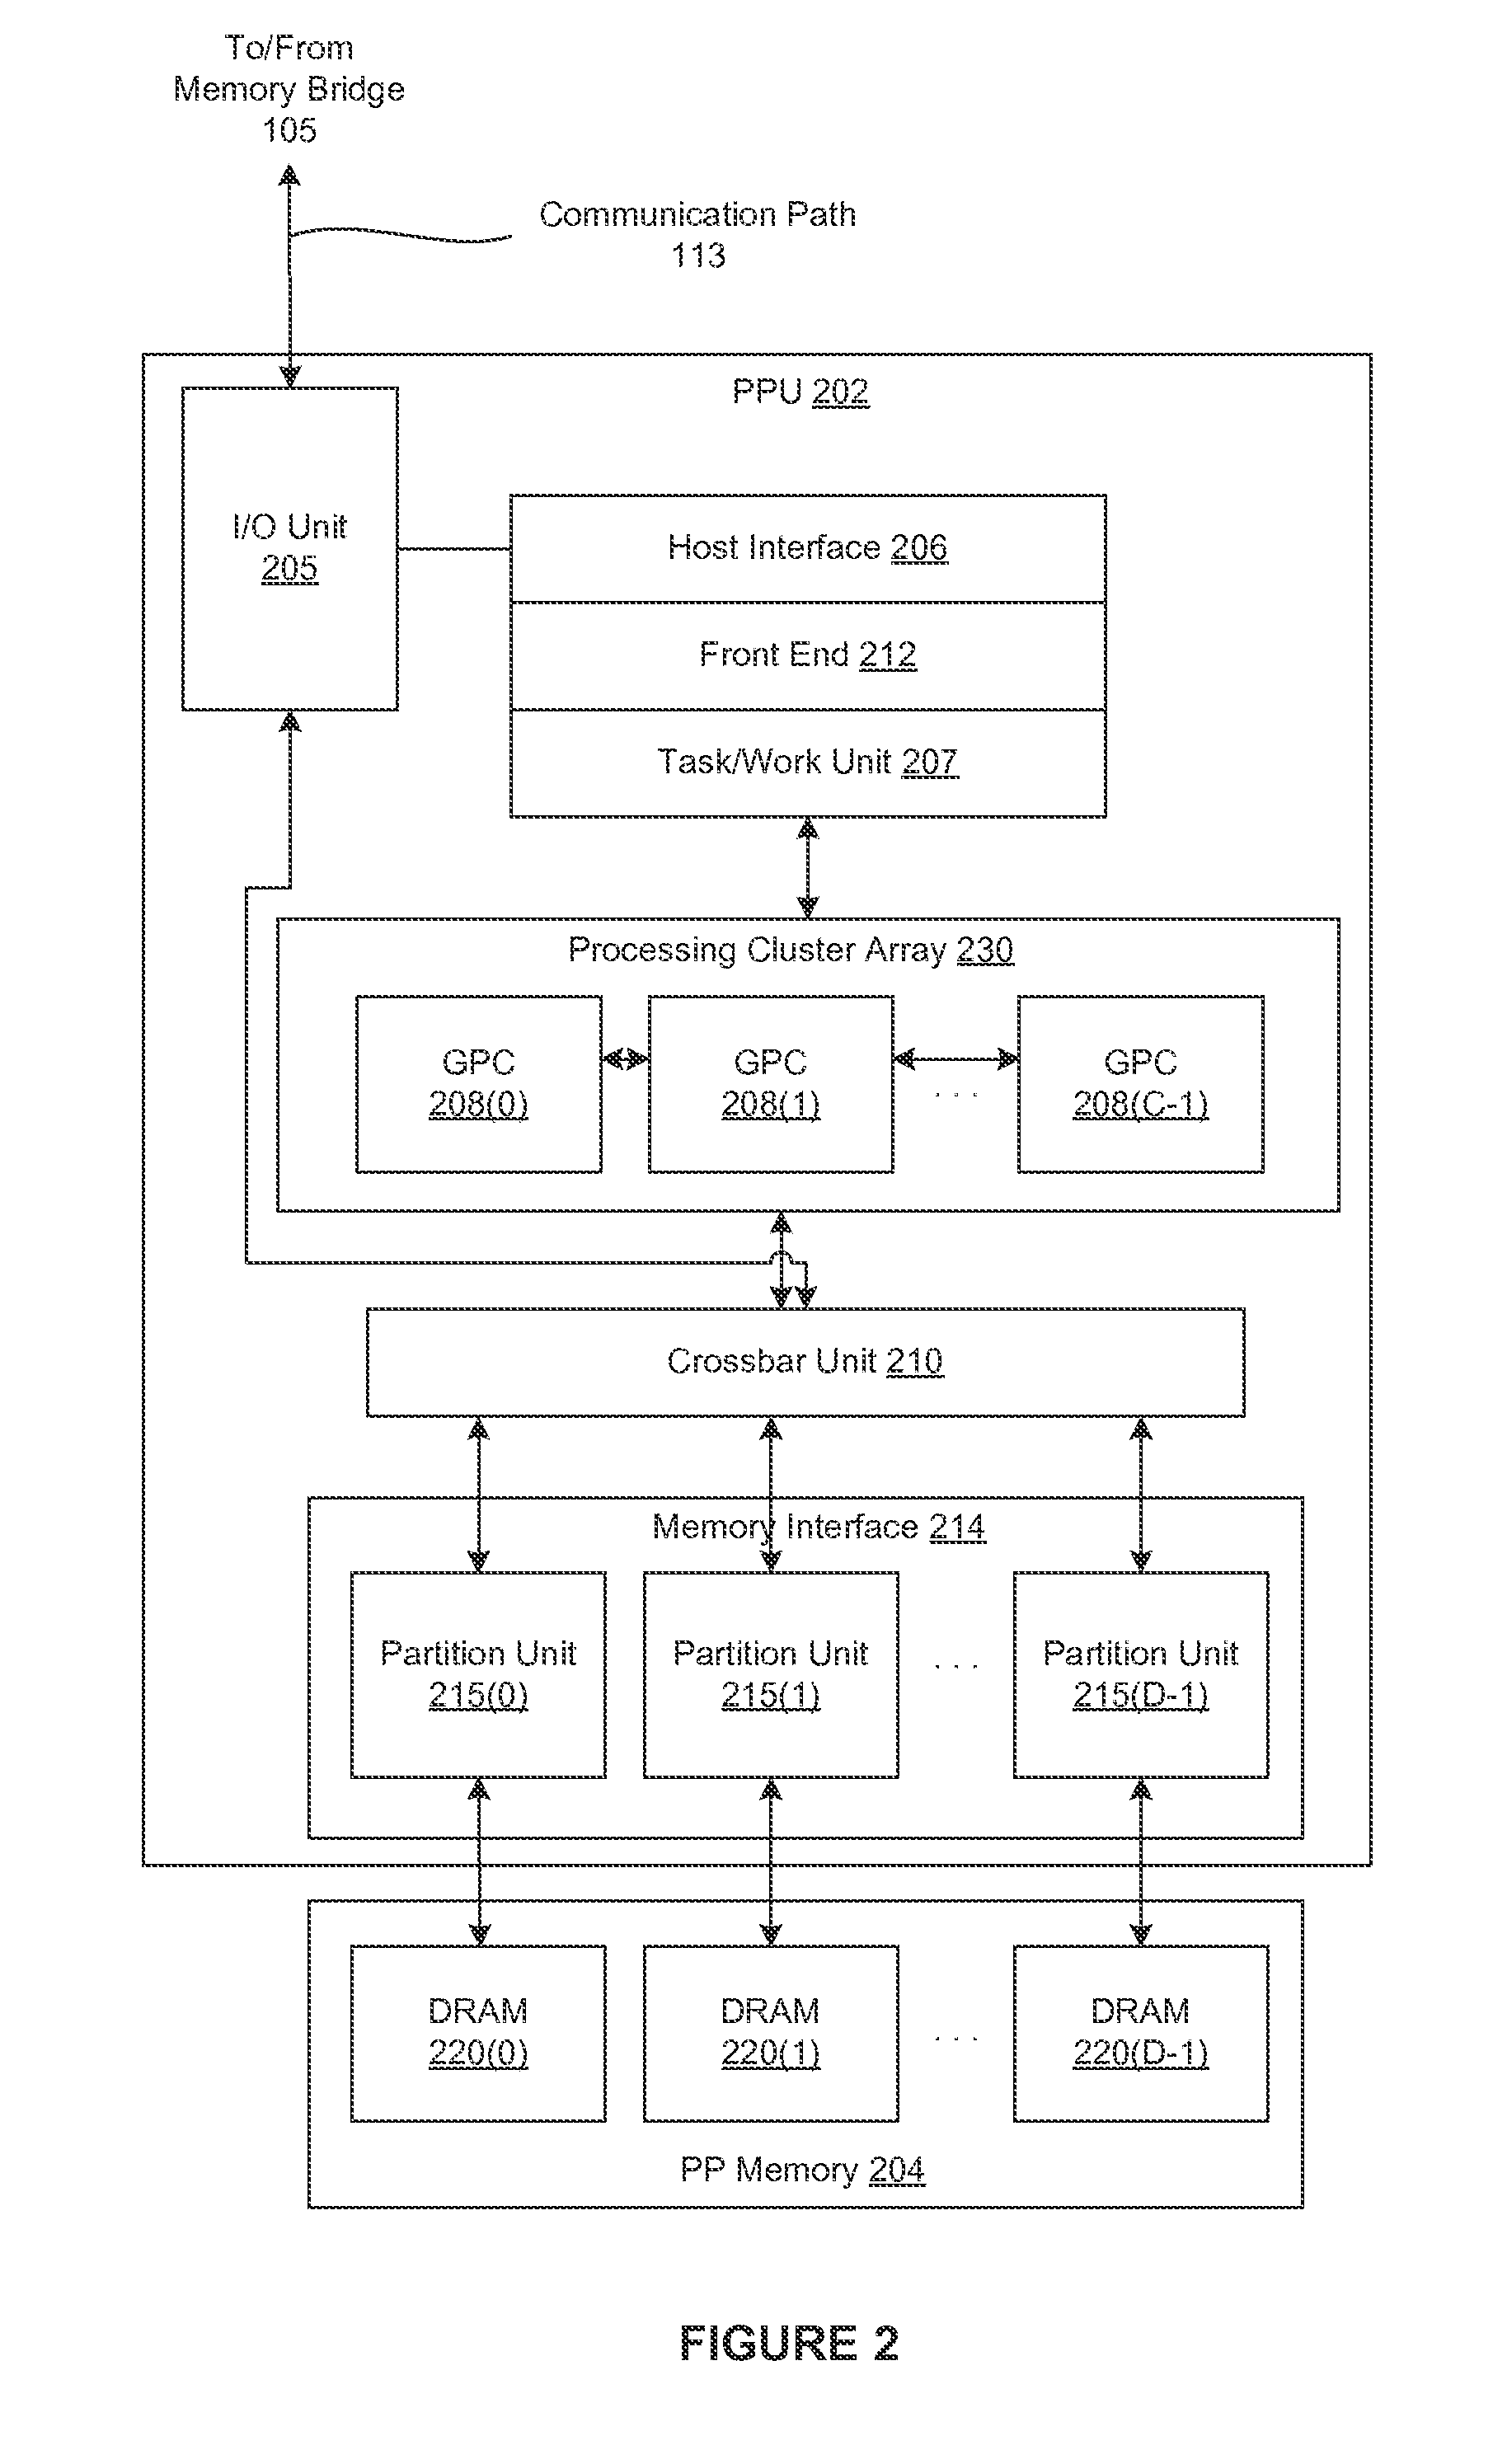 Performing multi-convolution operations in a parallel processing system